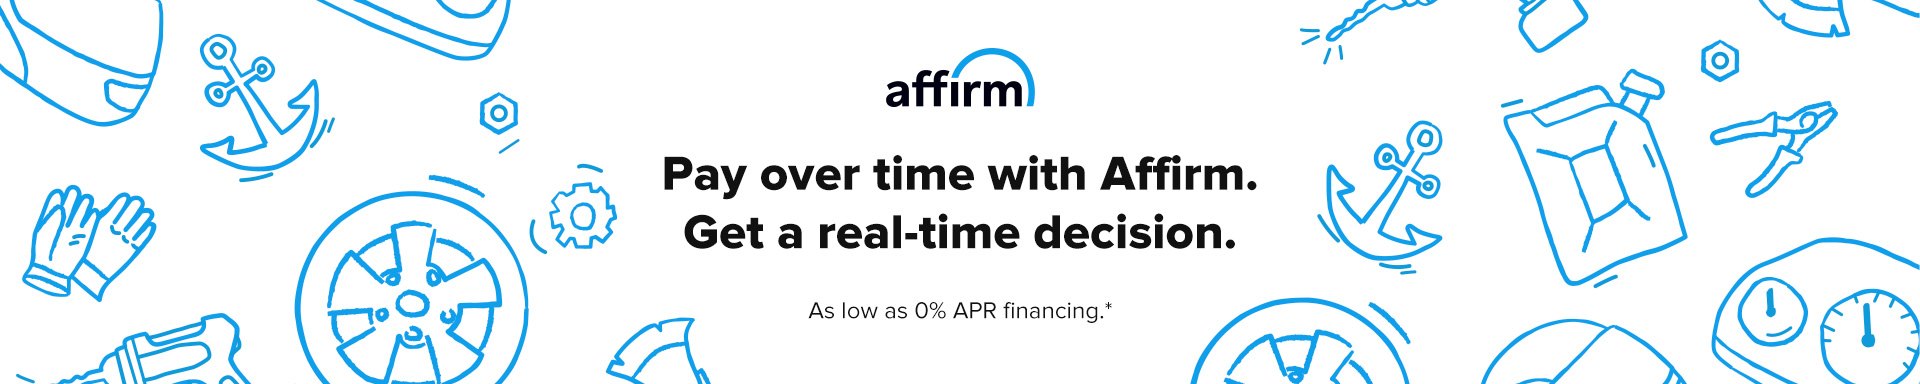 Affirm | Easy Financing | Pay Later with Affirm - TRUCKiD.com